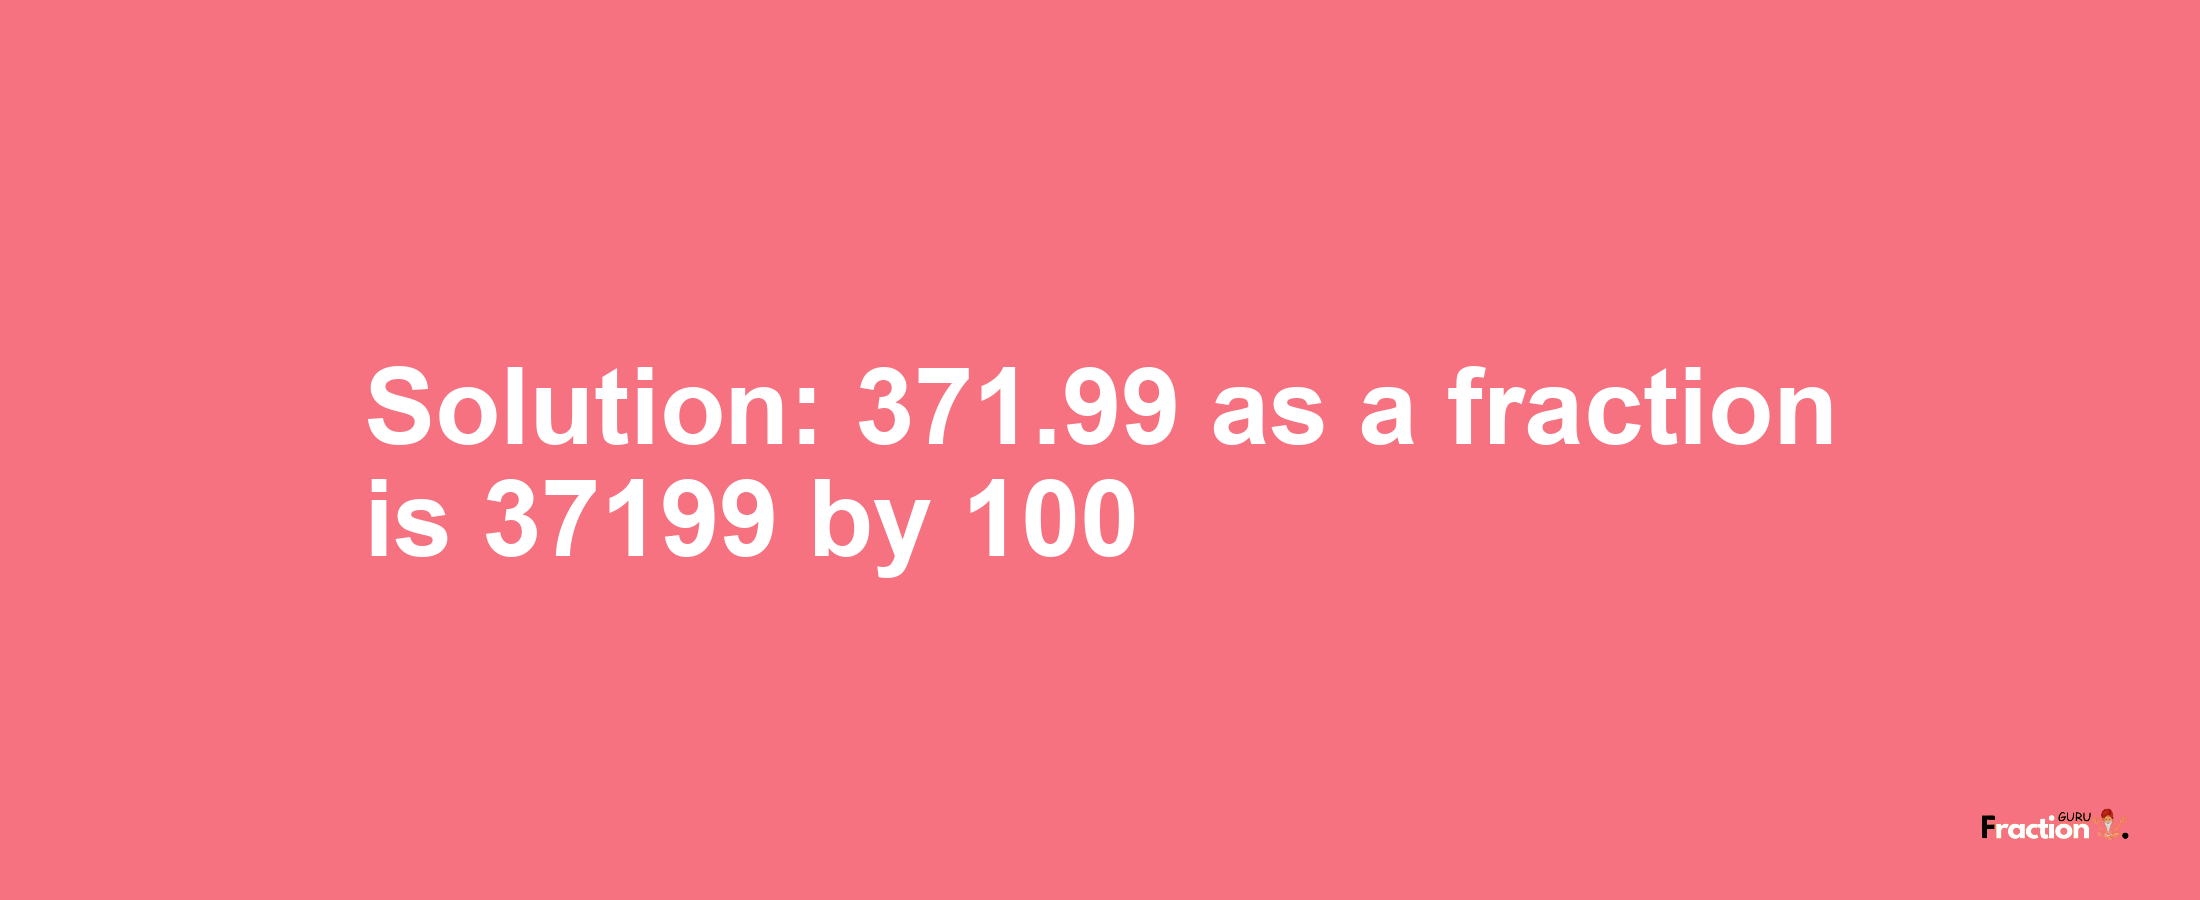 Solution:371.99 as a fraction is 37199/100